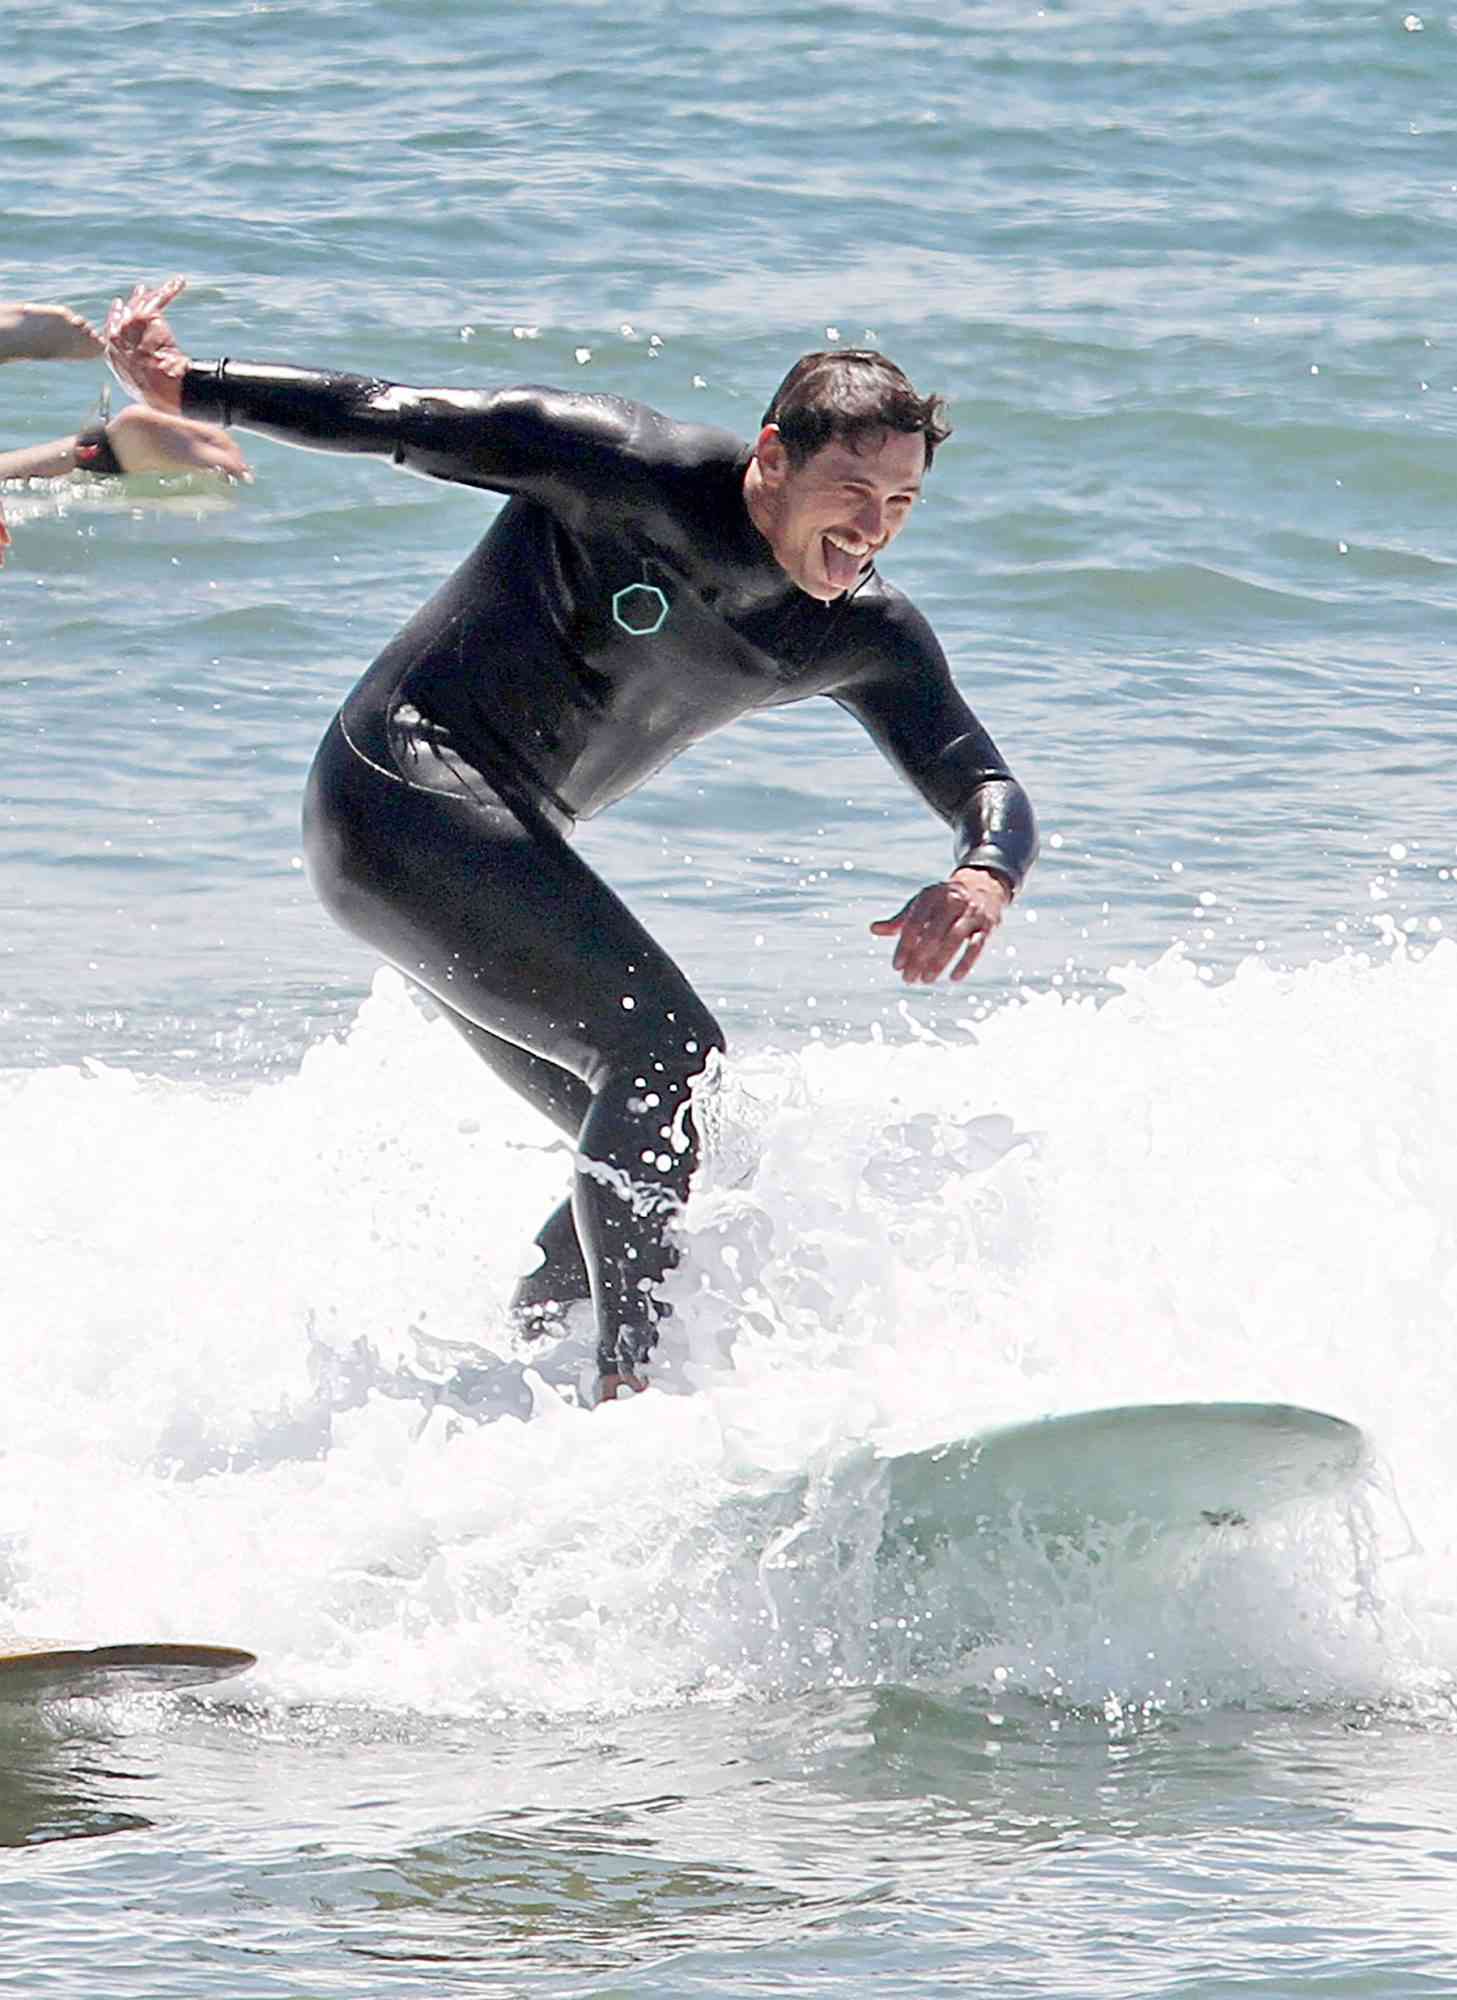 EXCLUSIVE: James Franco Hits The Beach in The Hamptons For Some Surfing